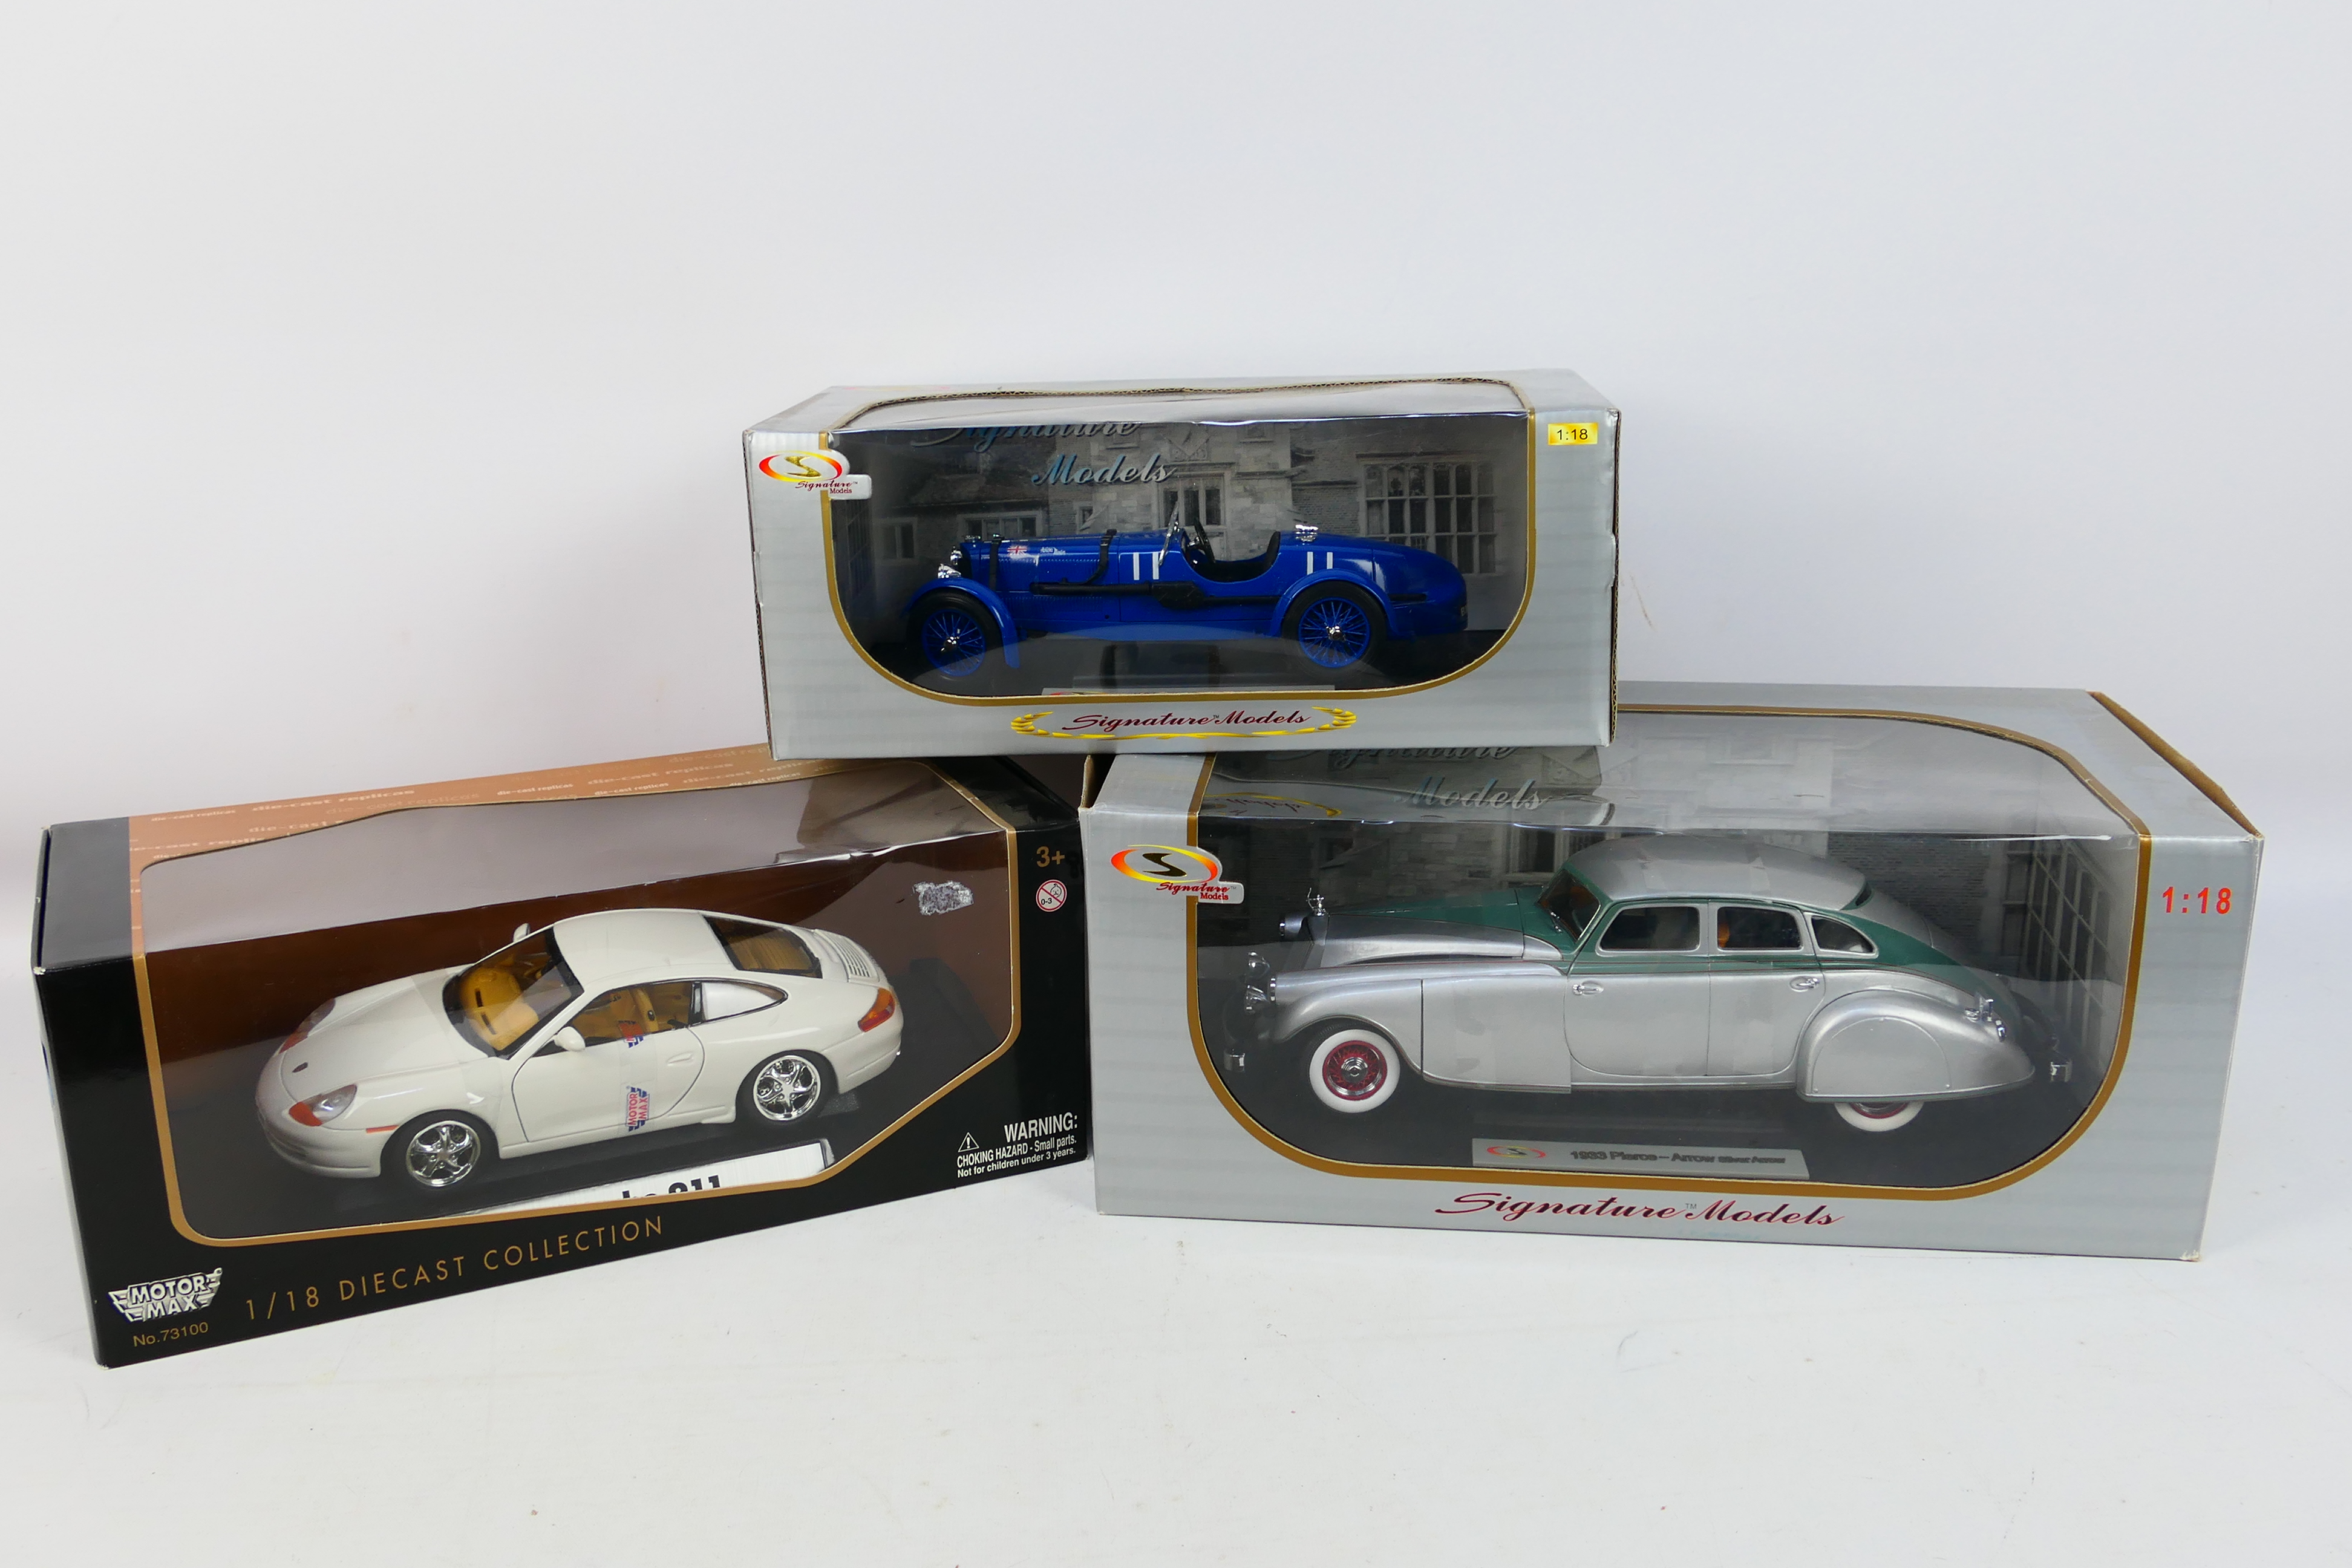 Signature Models - Motor Max - Three boxed 1:18 scale diecast model vehicles.